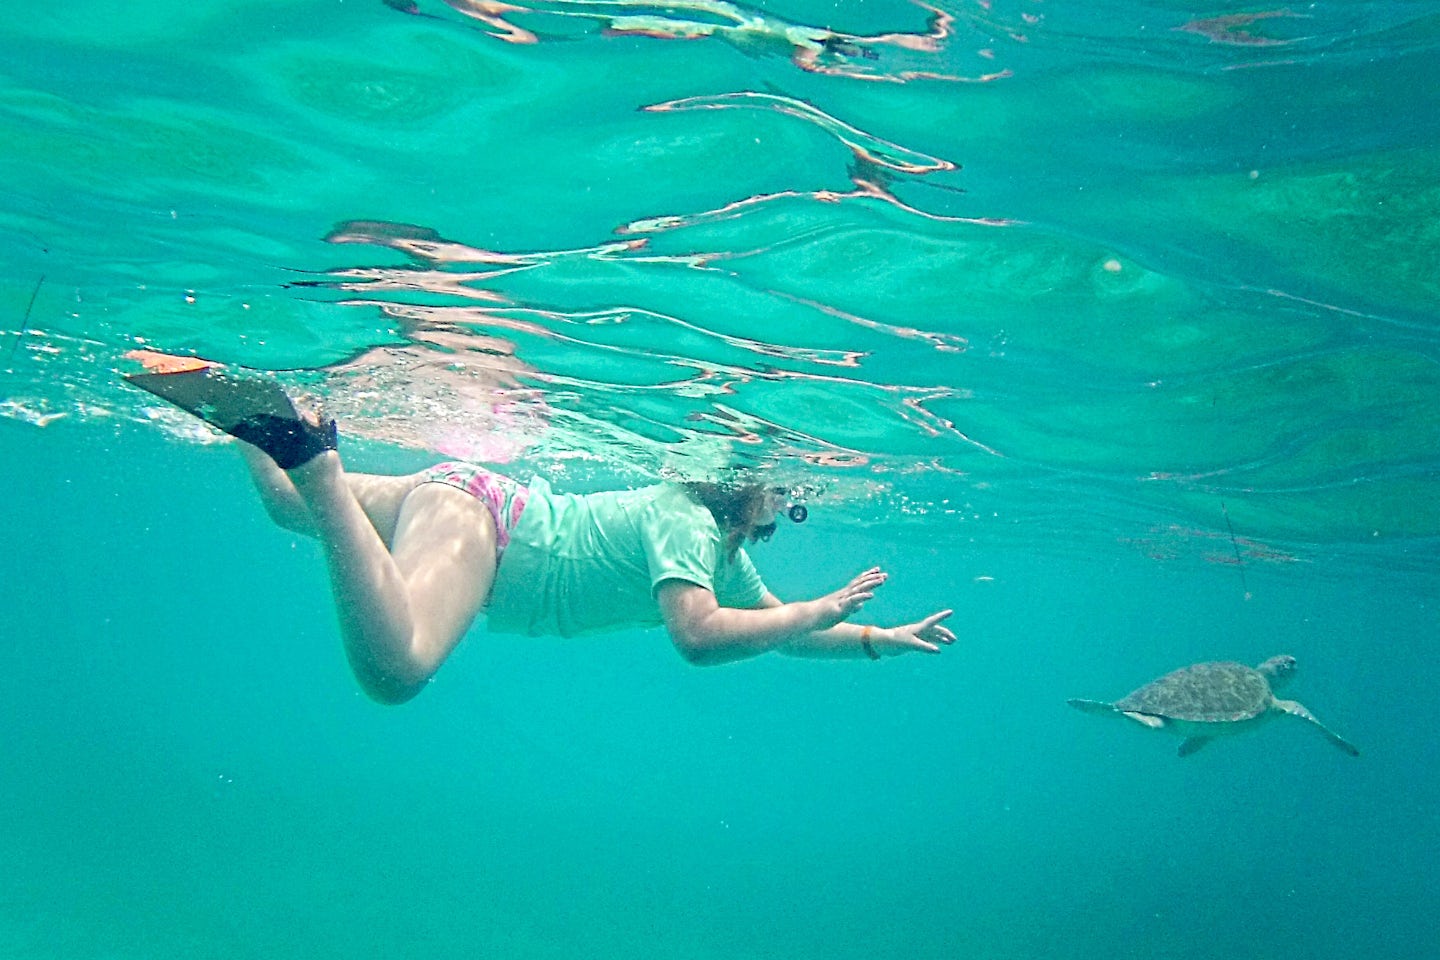 Snorkeling with the Sea Turtles was a complete HIGHLIGHT of our cruise.